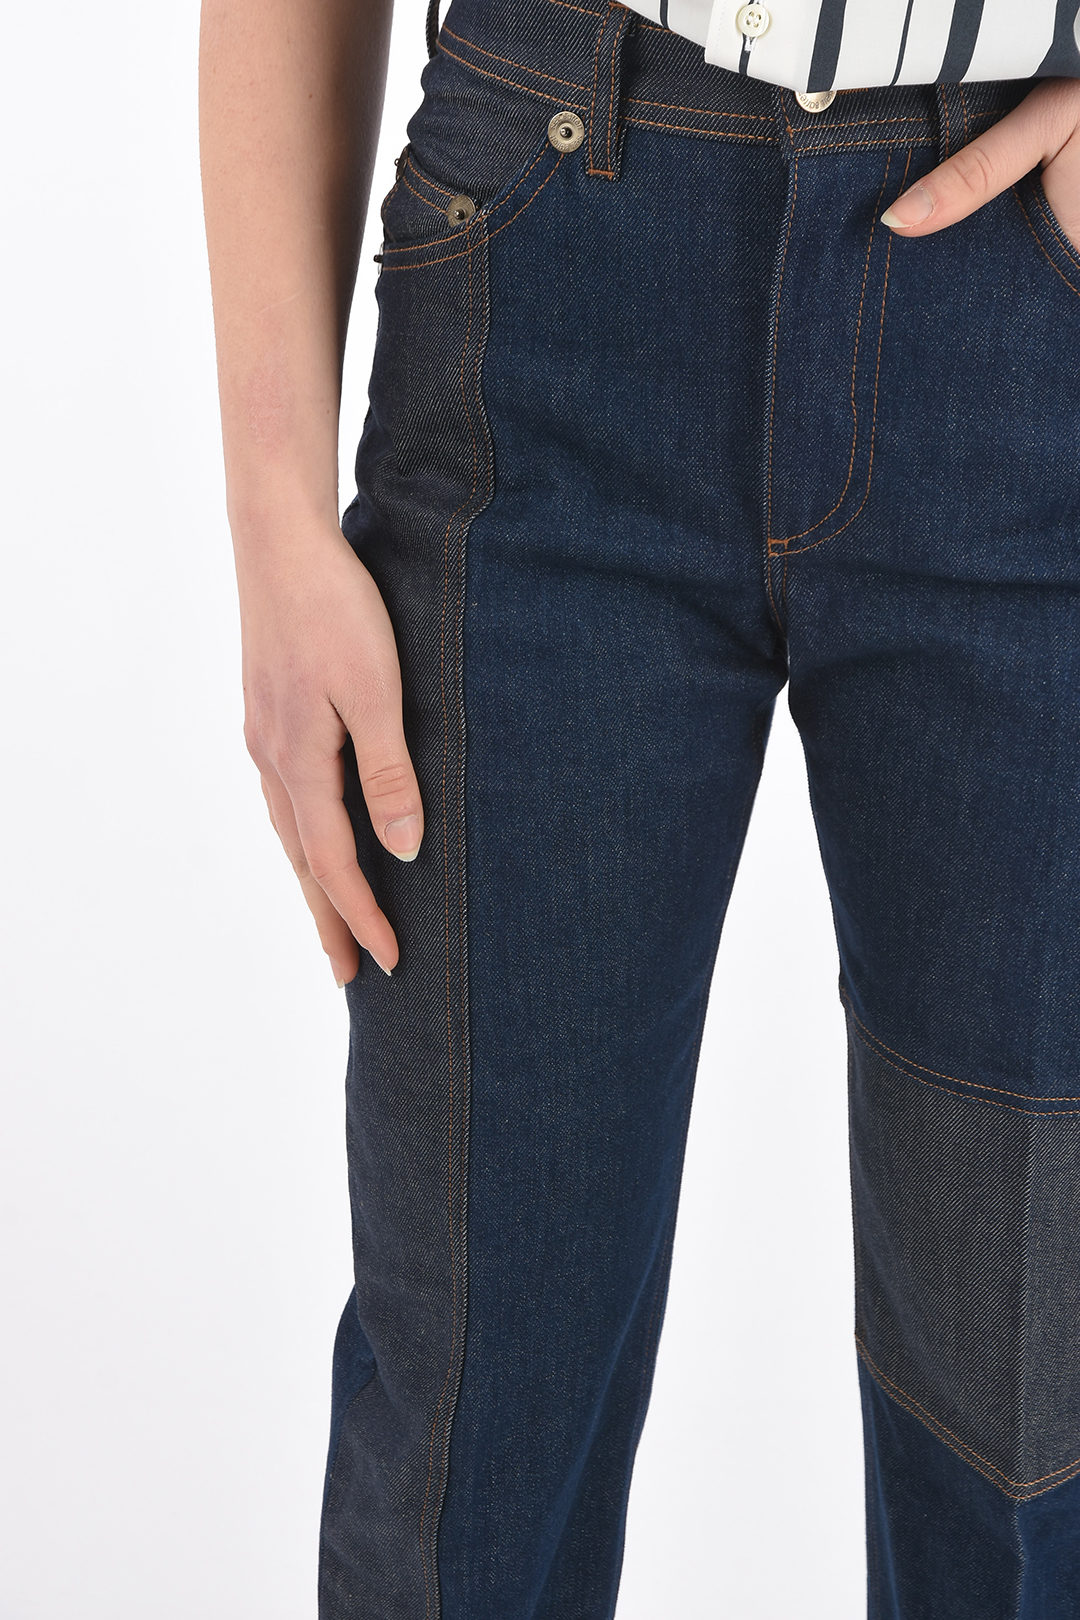 Two Tone Denims with Cuffs